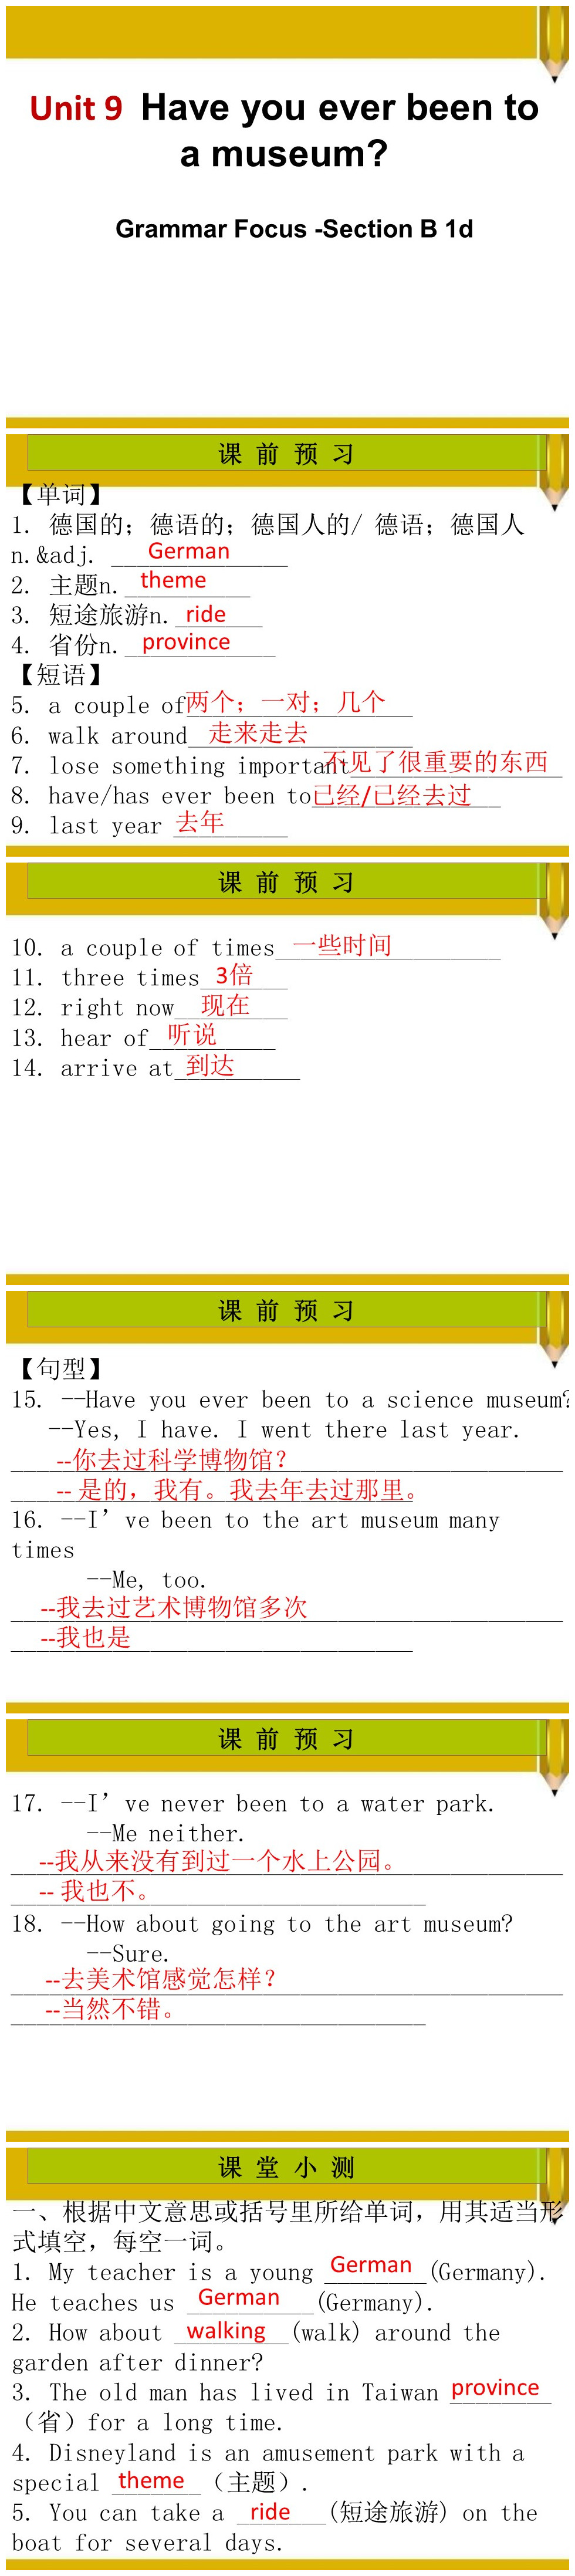 《Have you ever been to a museum?》PPT课件13